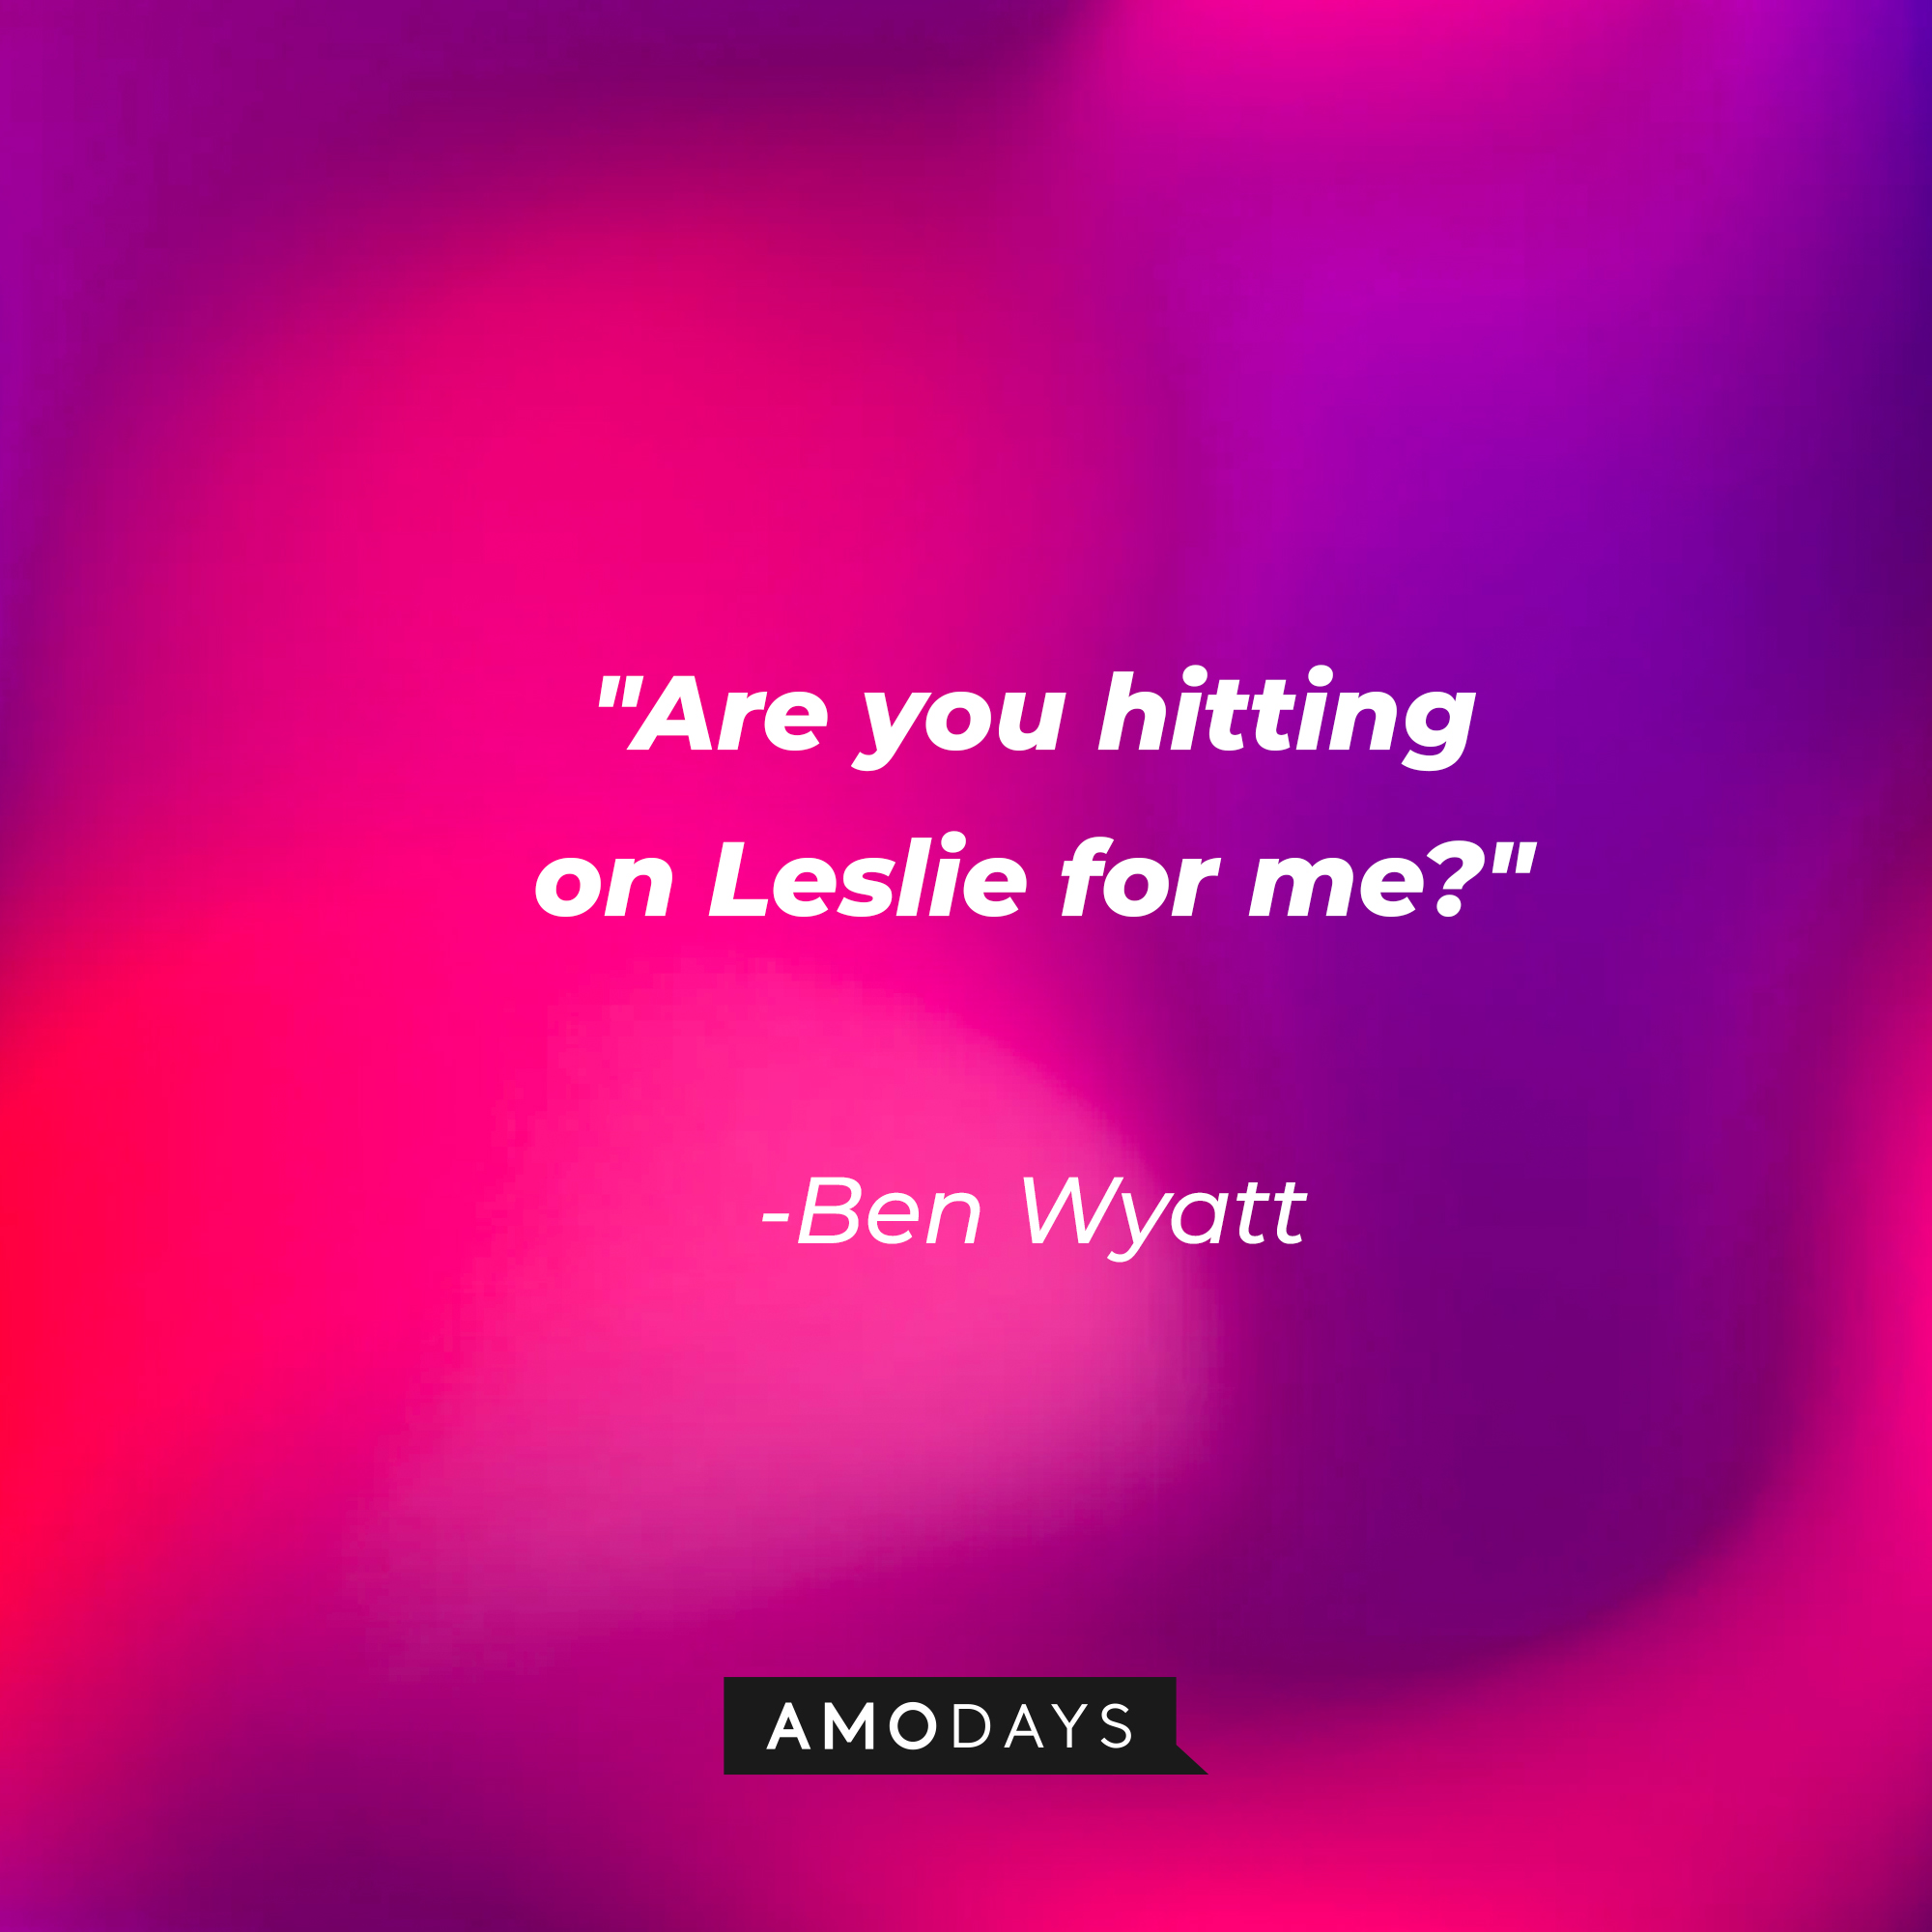 Ben Wyatt's quote: "Are you hitting on Leslie for me?" | Source: AmoDays